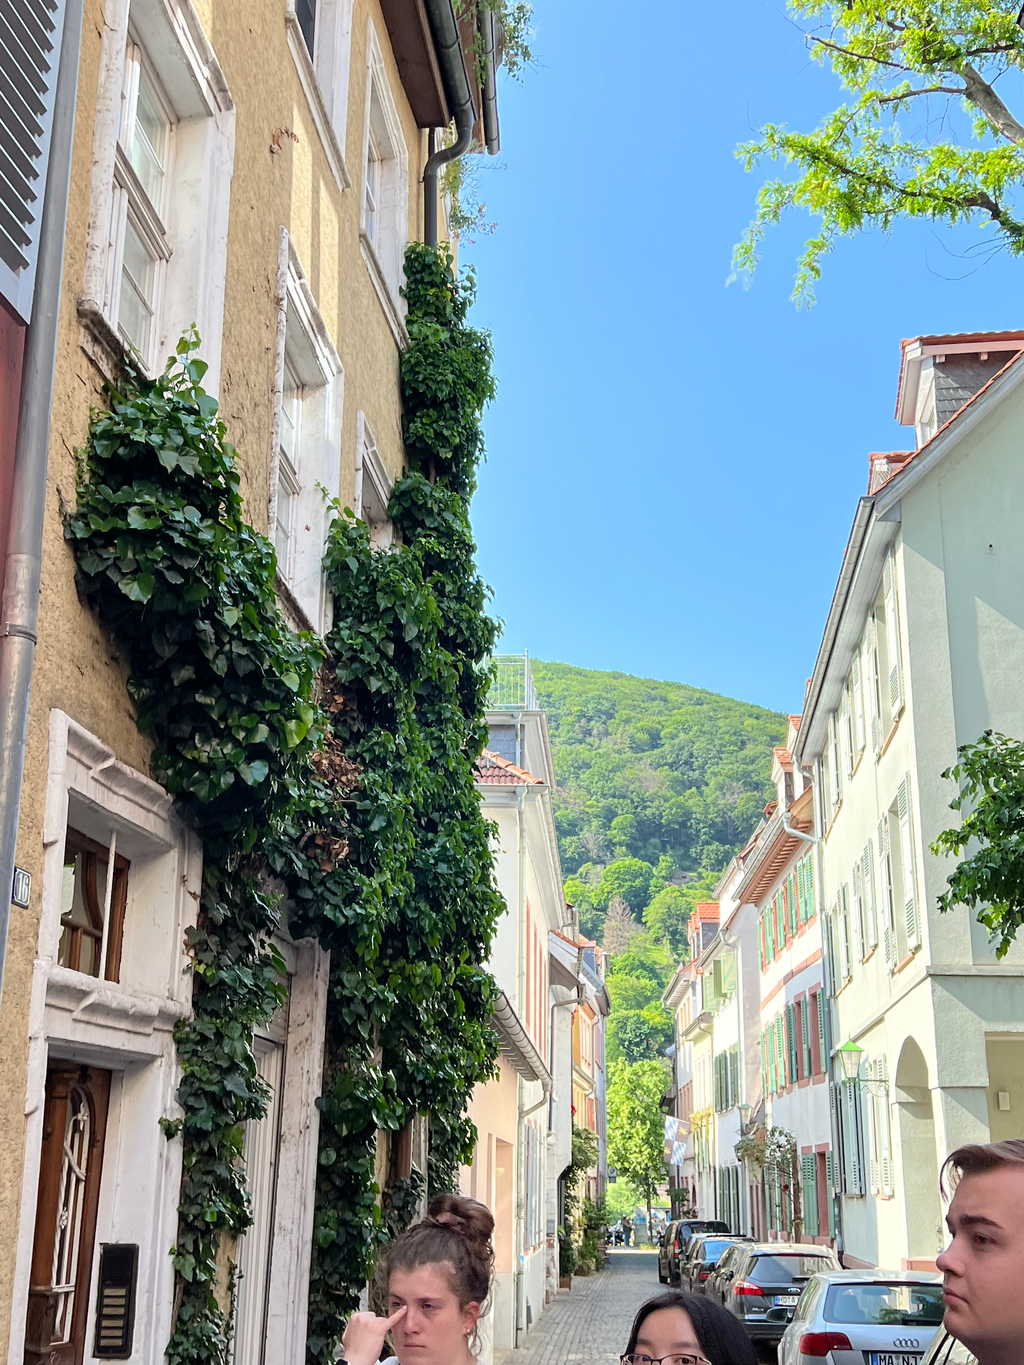 View down alley in European town with mountains in background